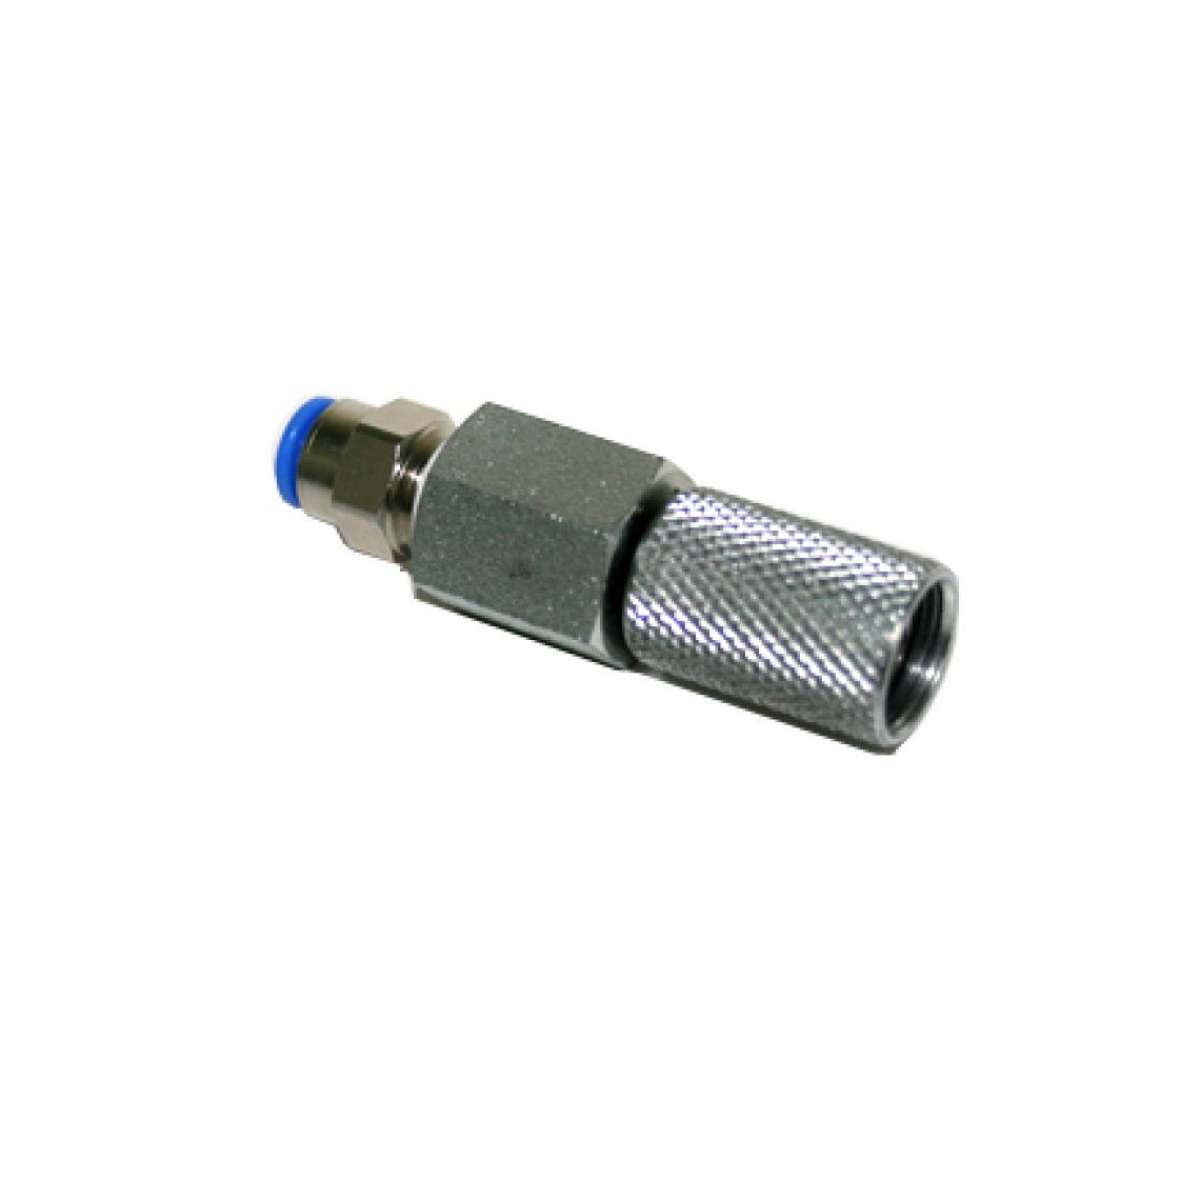 LT Sample Probe Adapter with Quick Attach for 1/4" OD Disposable Tubing